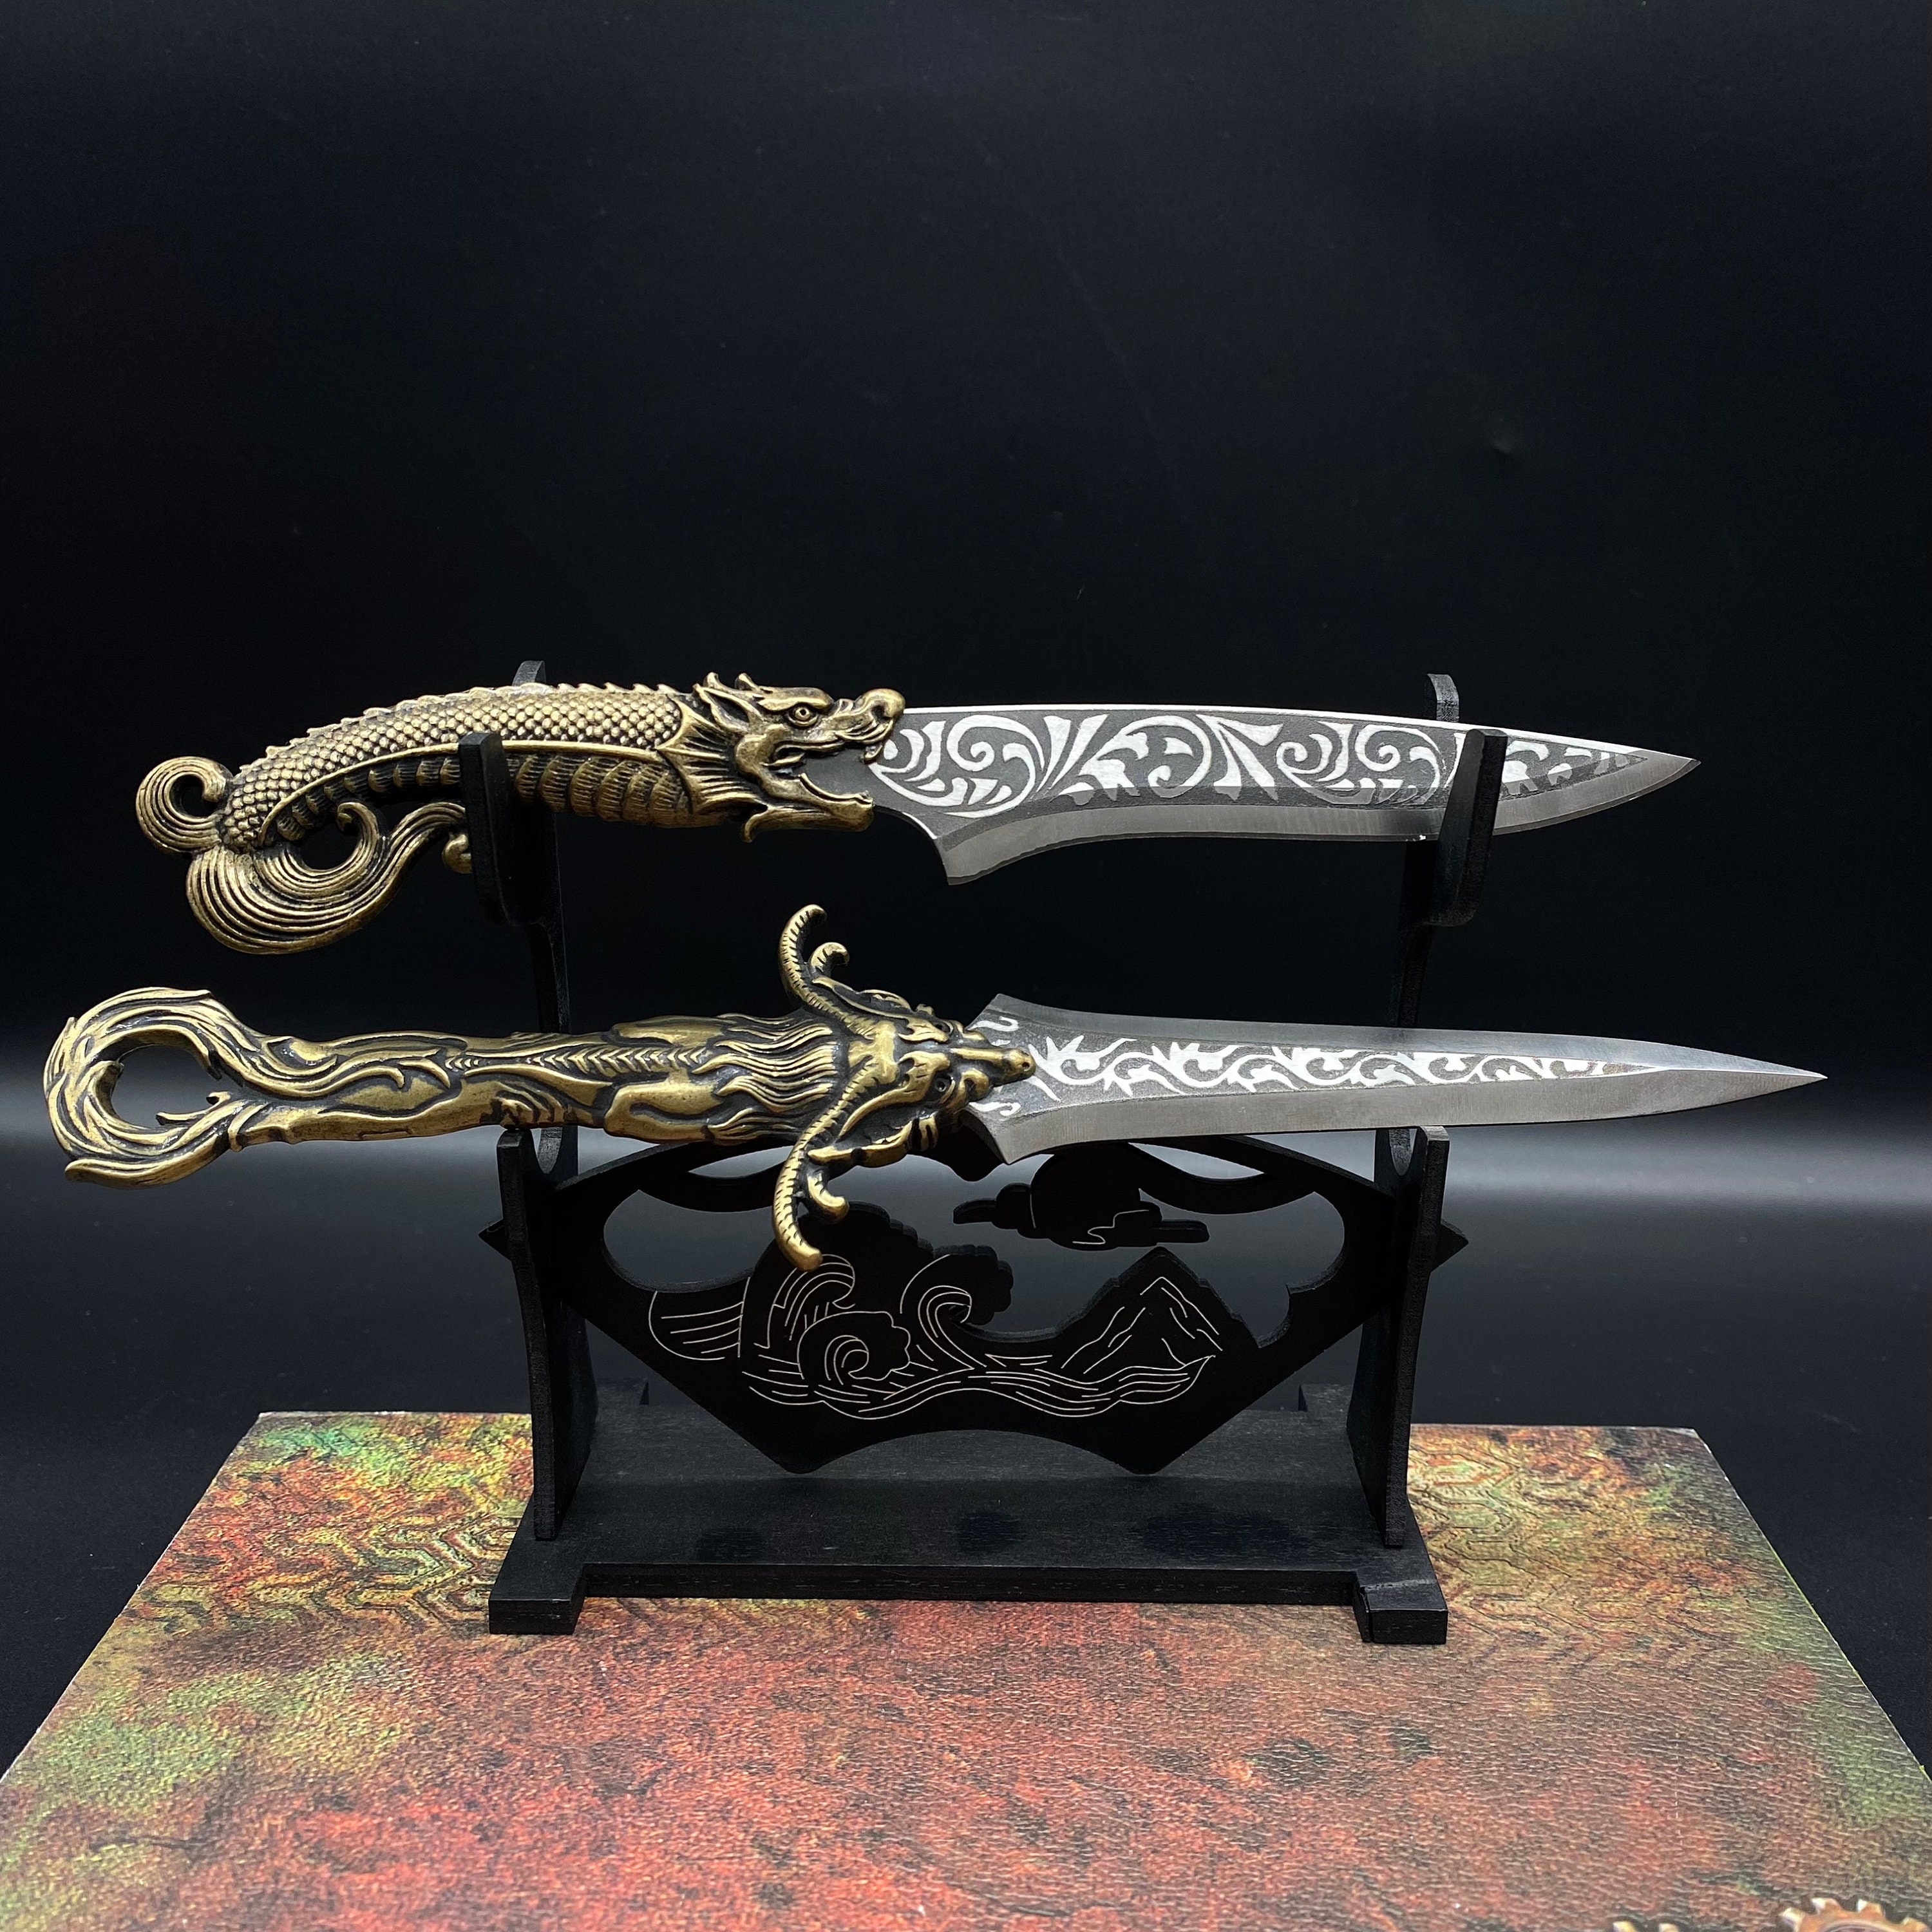 Cool `Obsidian Blade` Dragon Dagger and Holder Goth, One Size - Food 4 Less